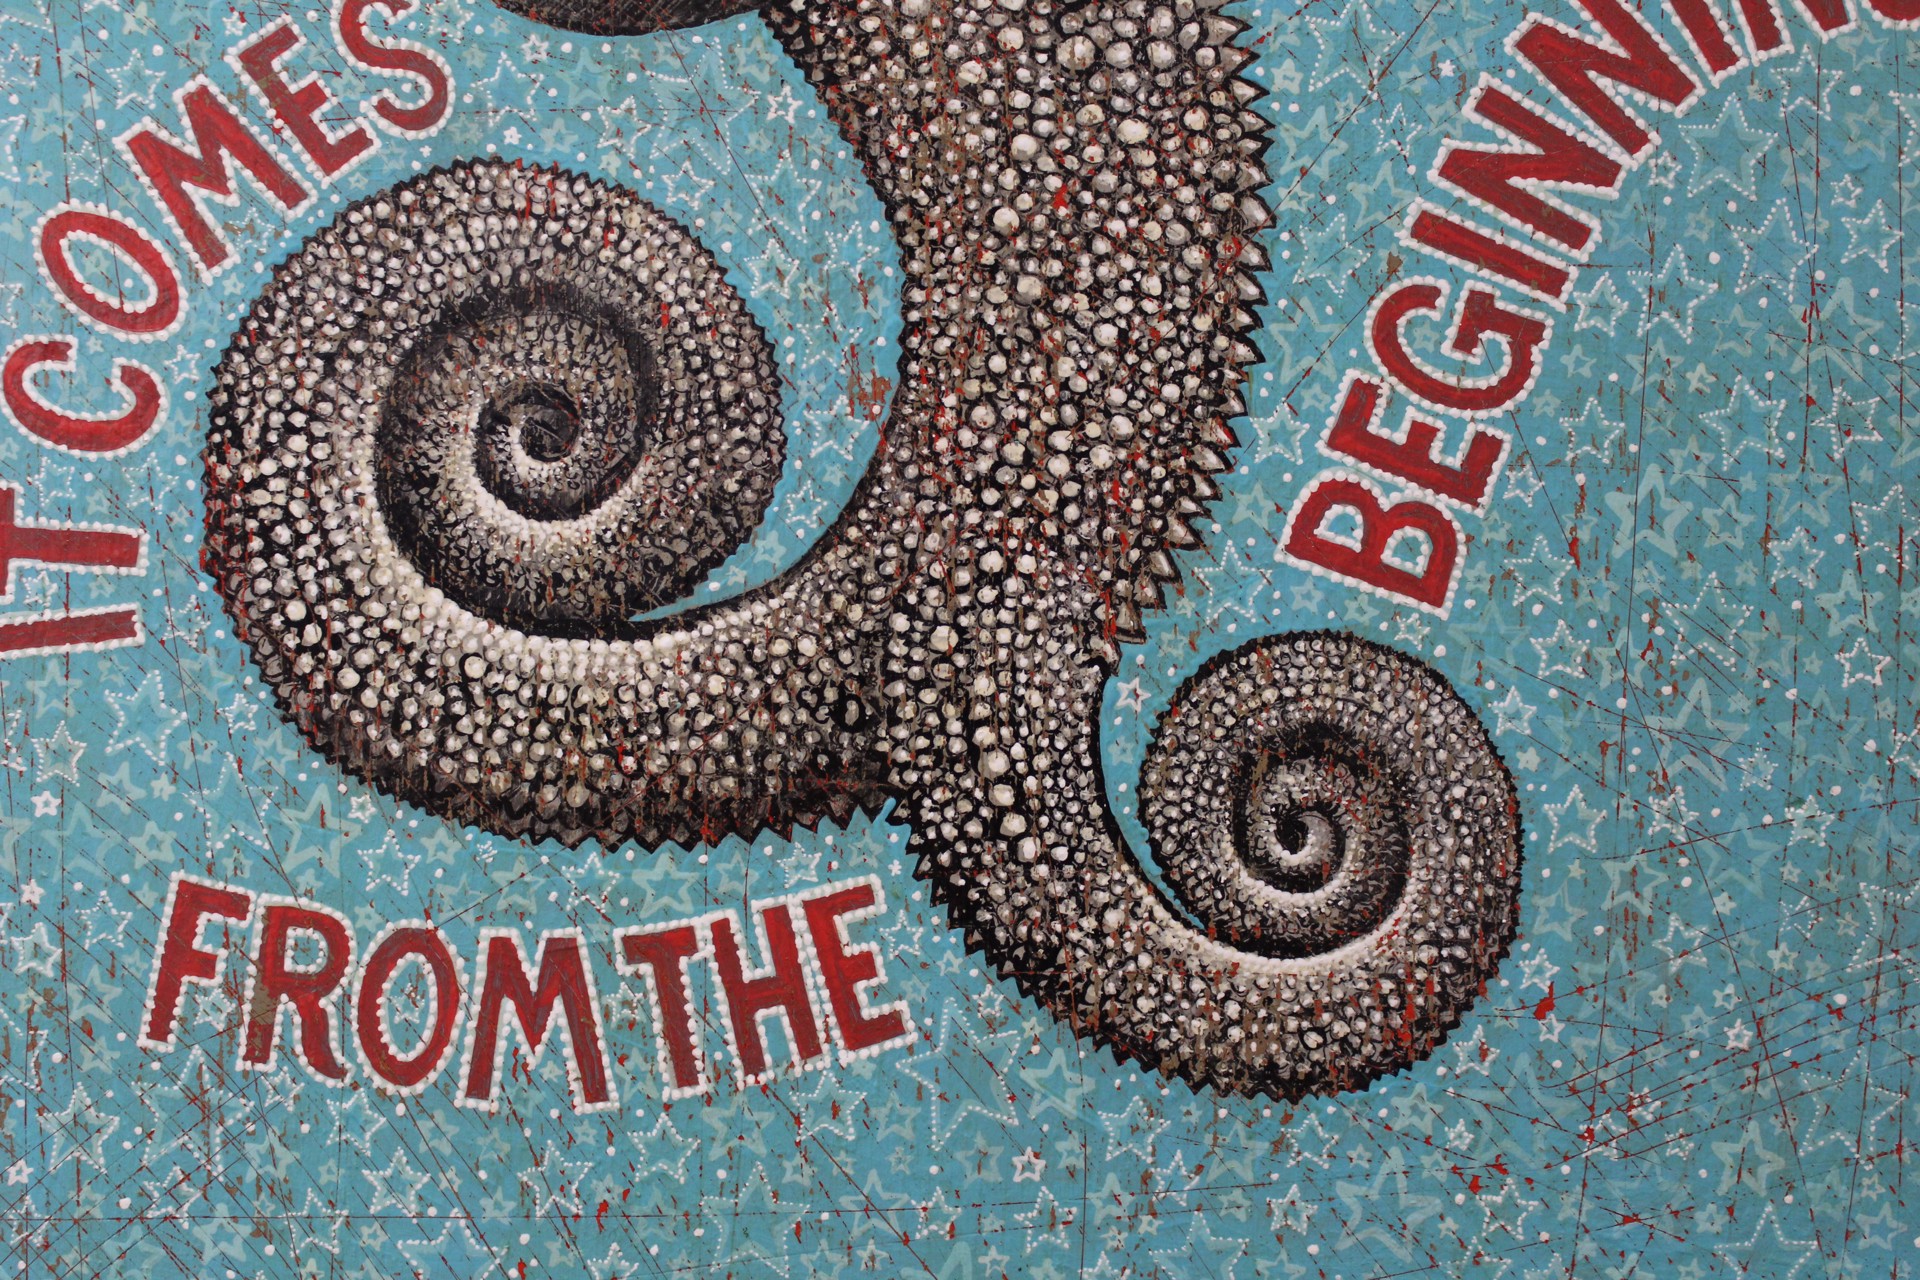 From the Beginning by Jon Langford